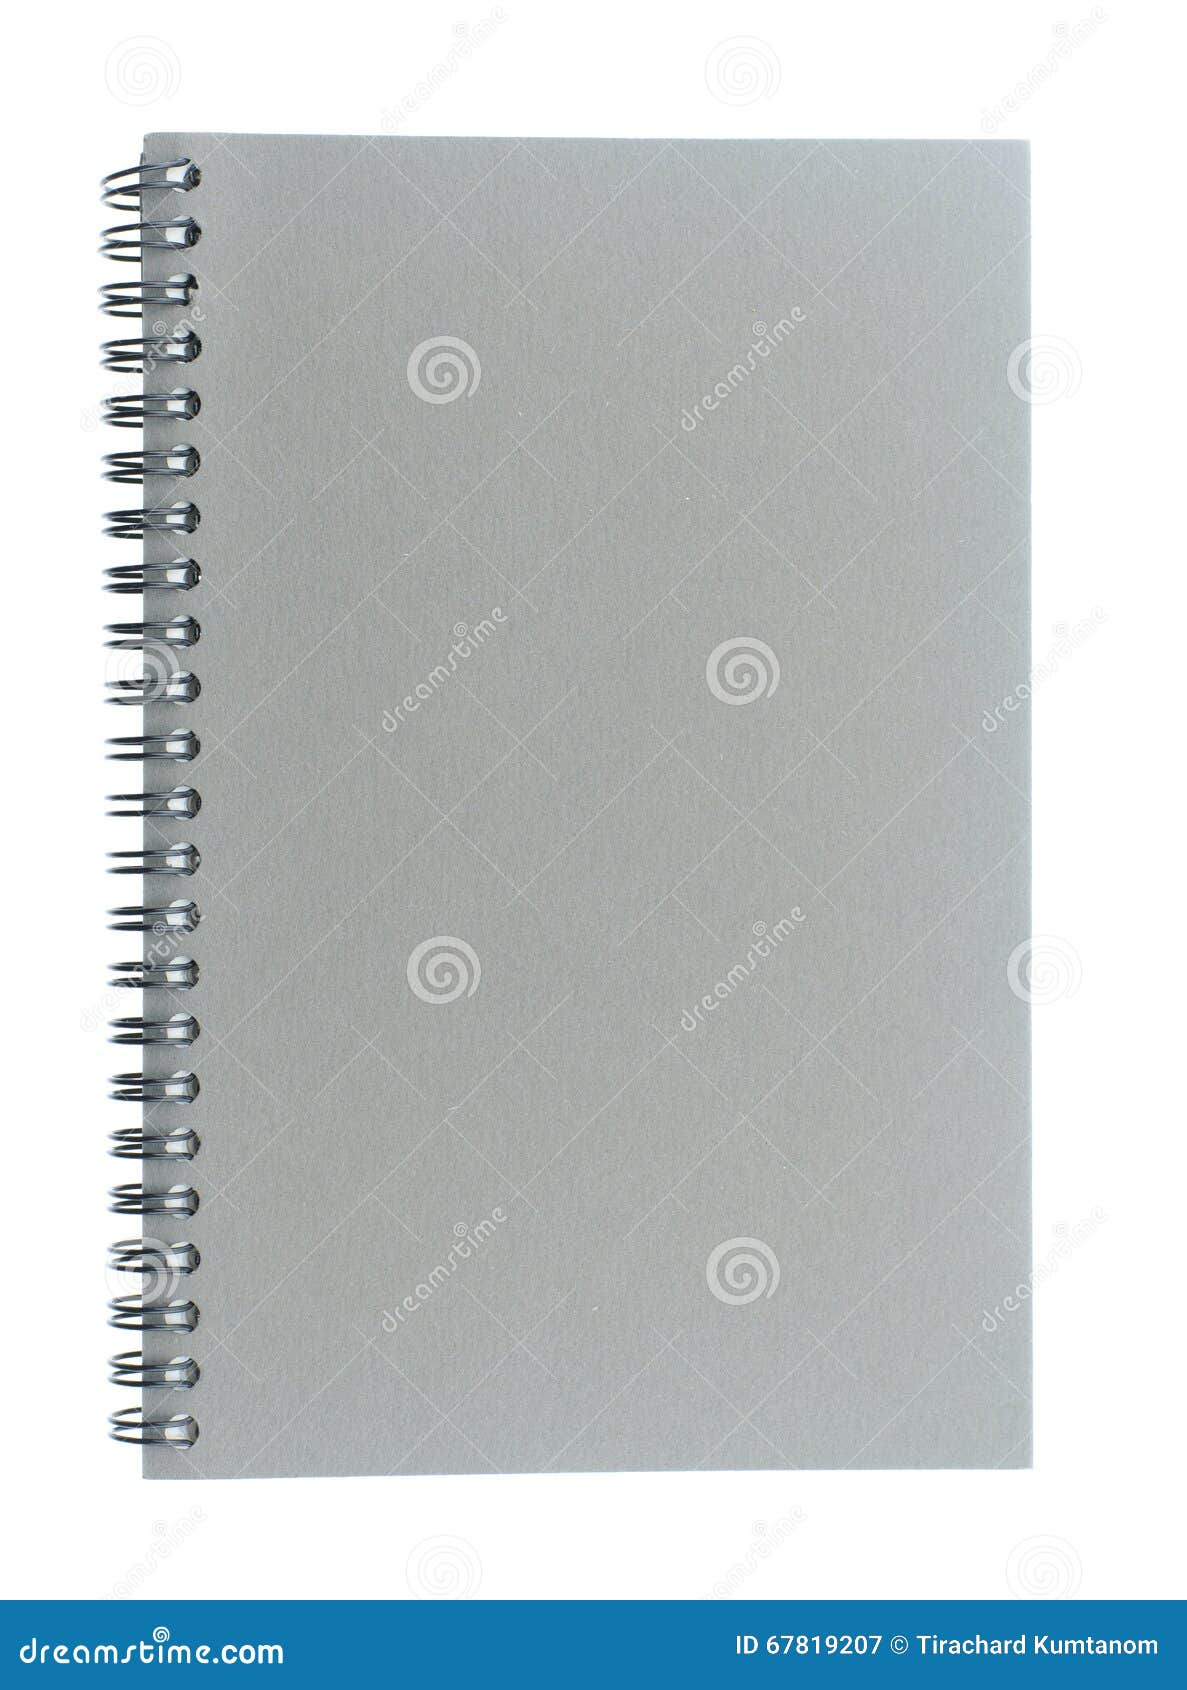 Wire bound or spiral bound sketchbook made from grey board isolated on white background.